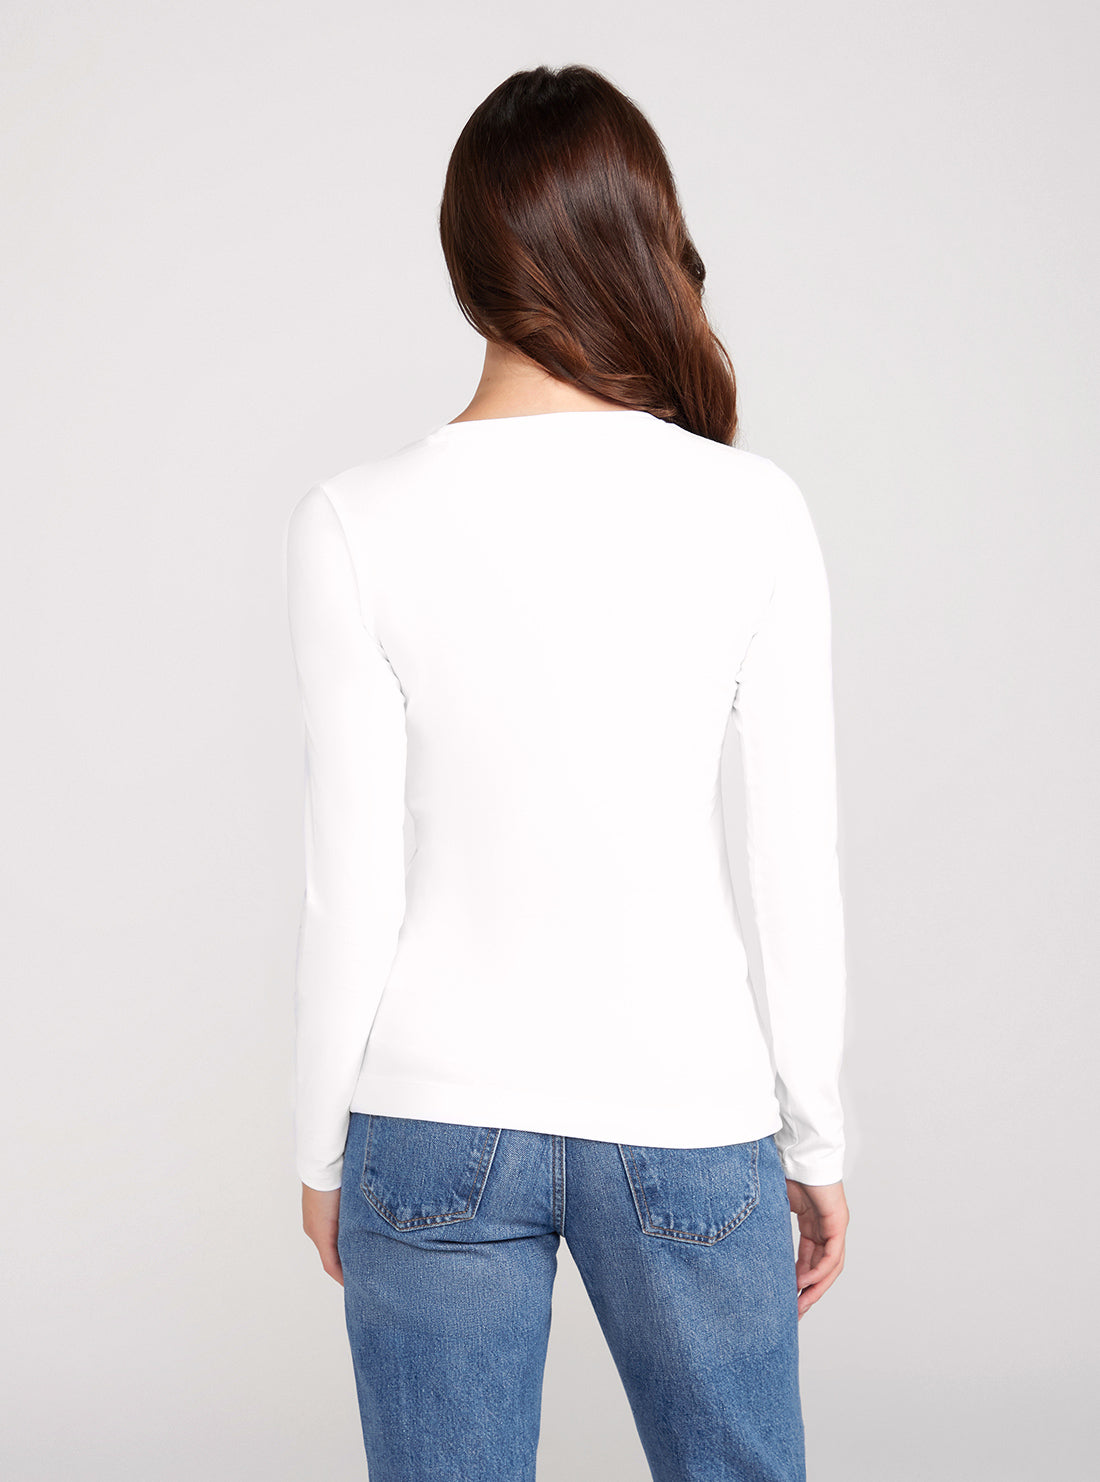 GUESS White Long Sleeve Triangle Flowers T-Shirt back view